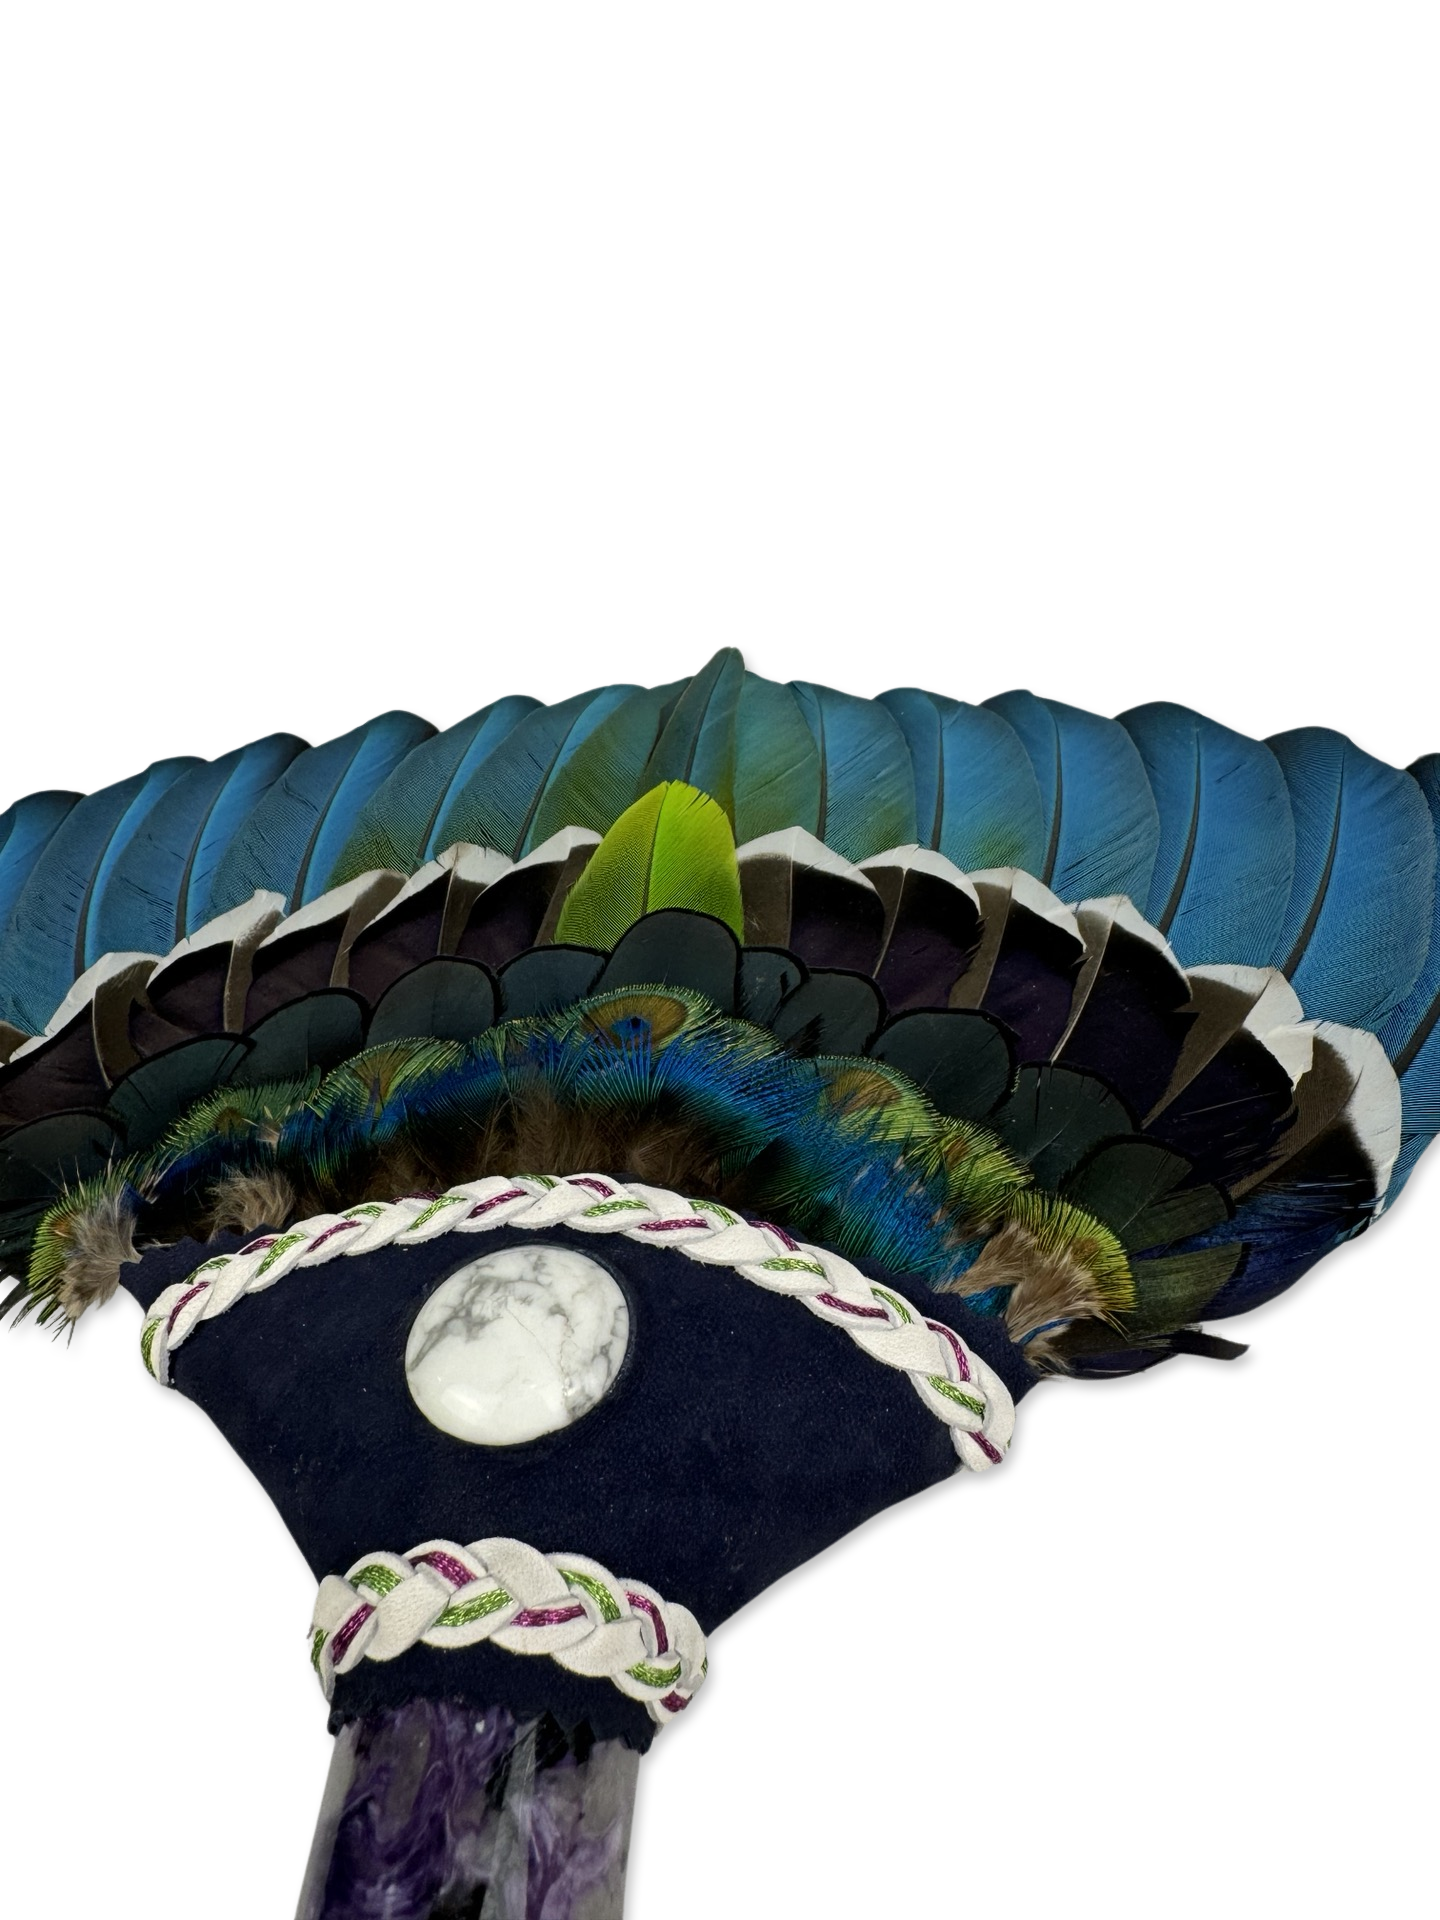 Macaw Smudge Fan with Charoite Jade Stone Handle